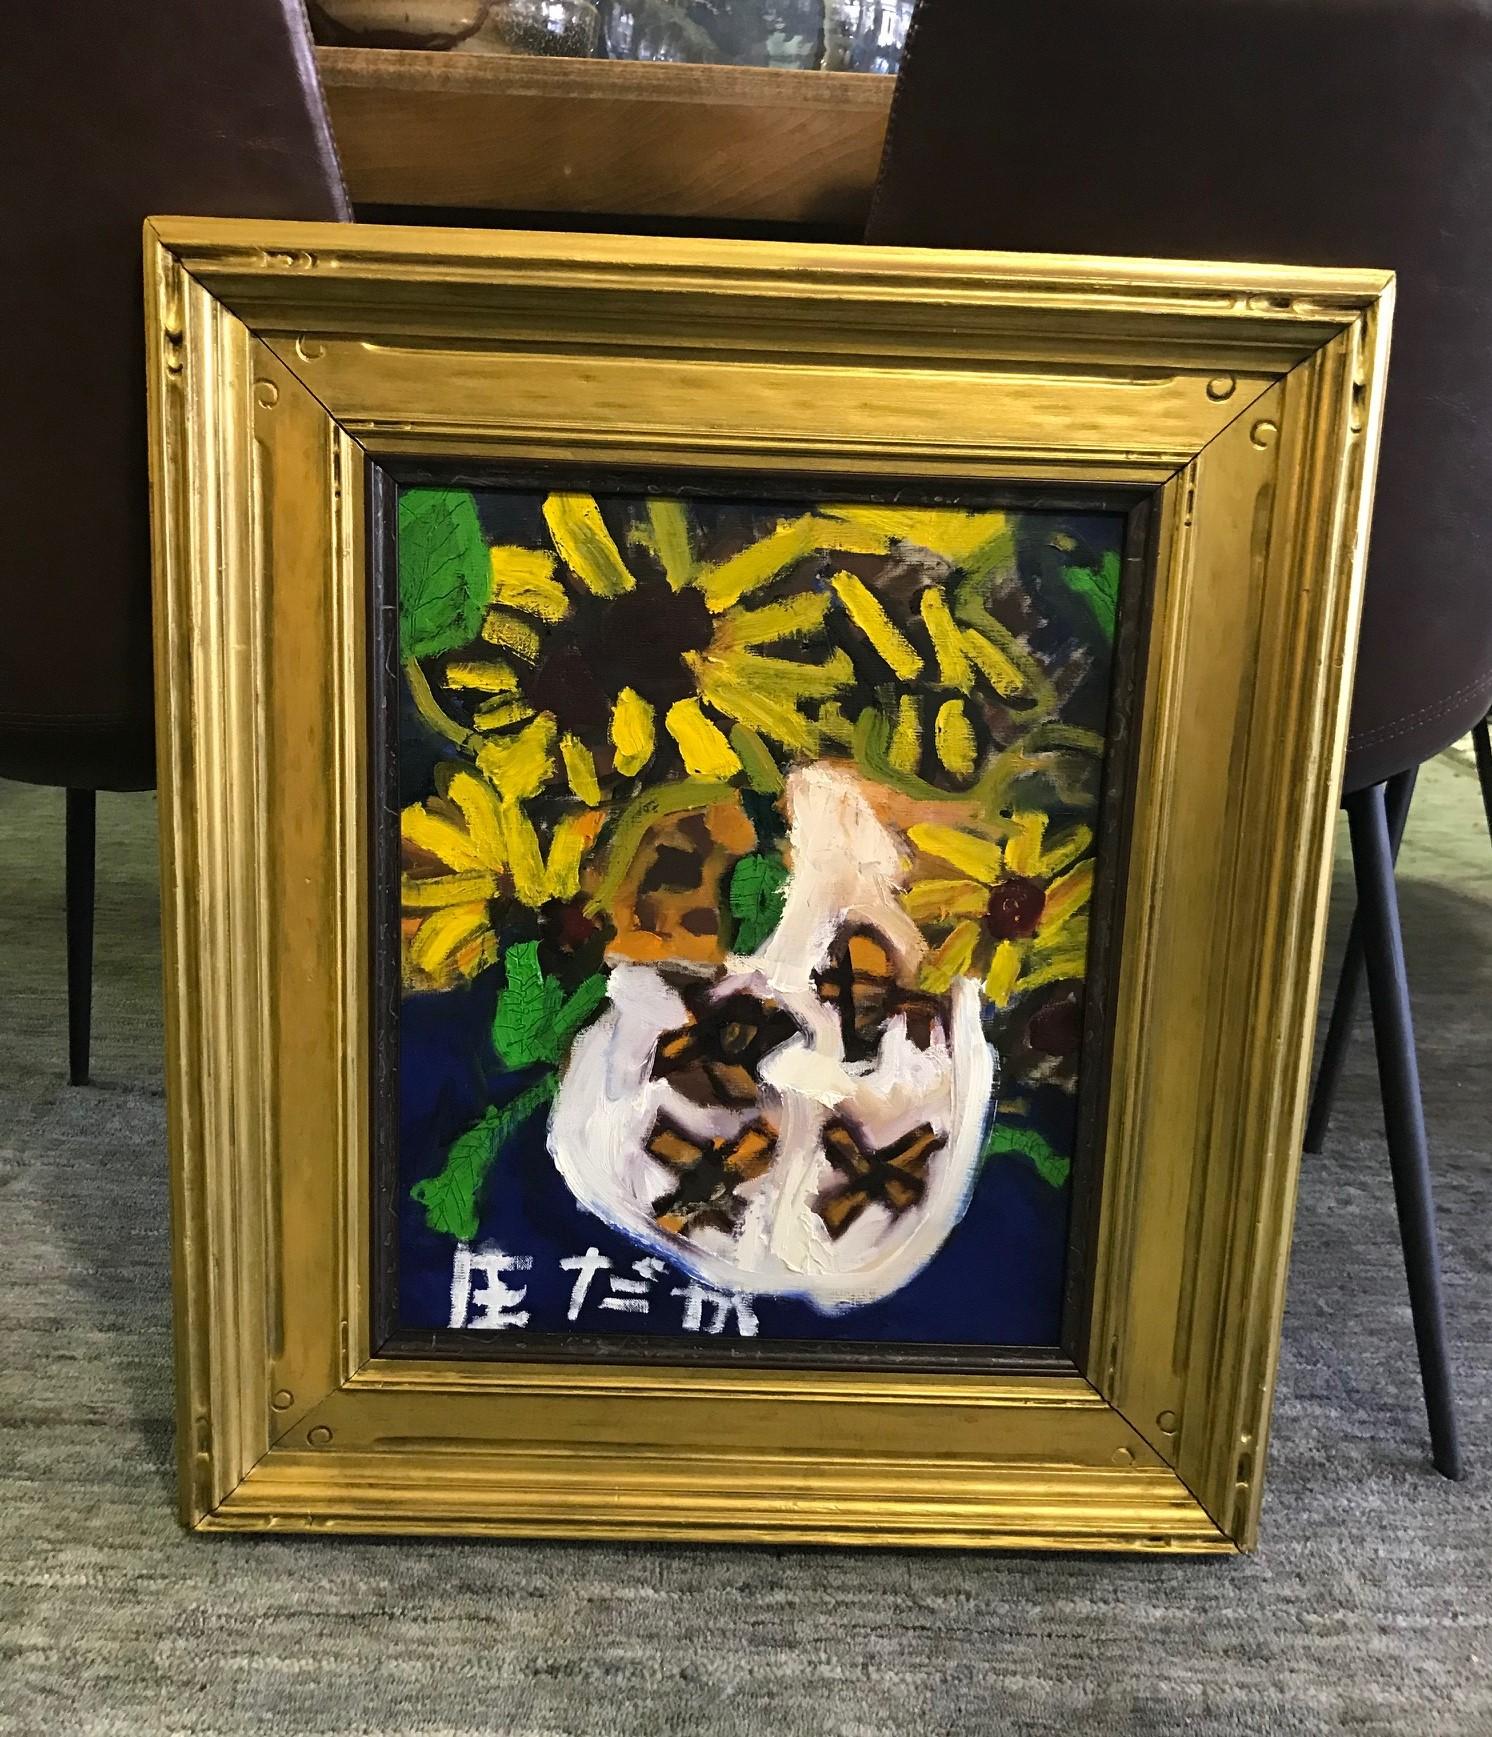 A beautifully realized, deeply colored original abstract floral oil painting on canvas by renowned Japanese modern artist Hodaka Yoshida who was the second son of one of Japan's most celebrated artist Hiroshi Yoshida, though stylistically Hodaka